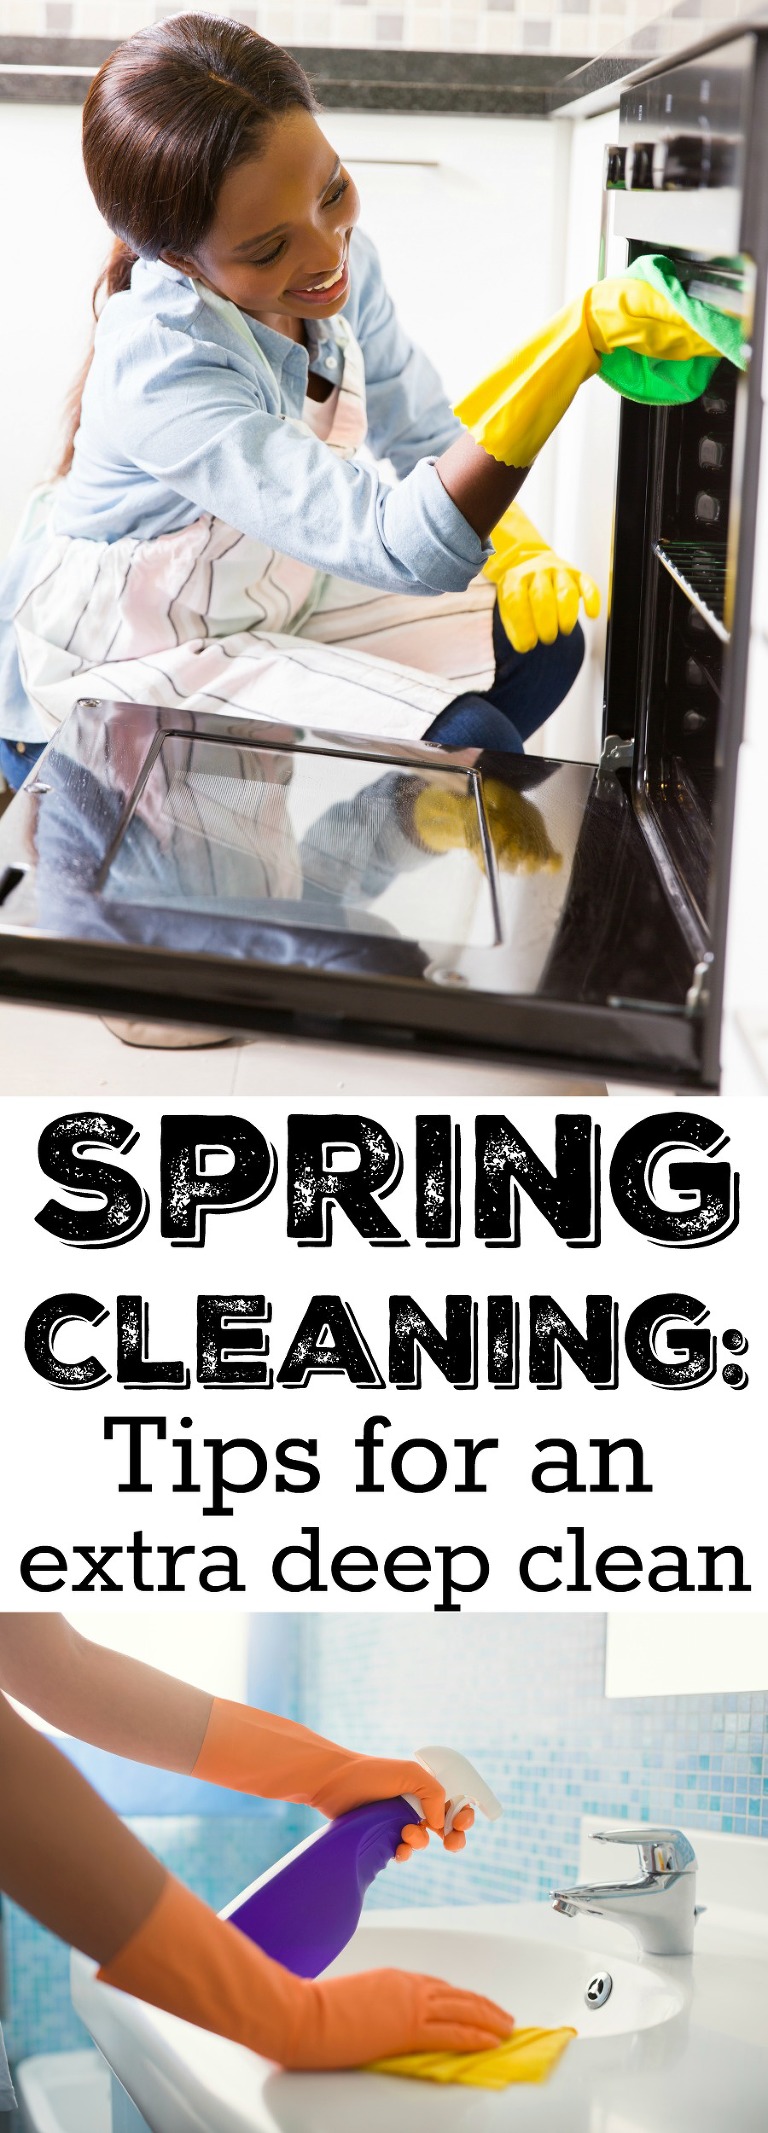 Tips for an extra deep clean when spring cleaning